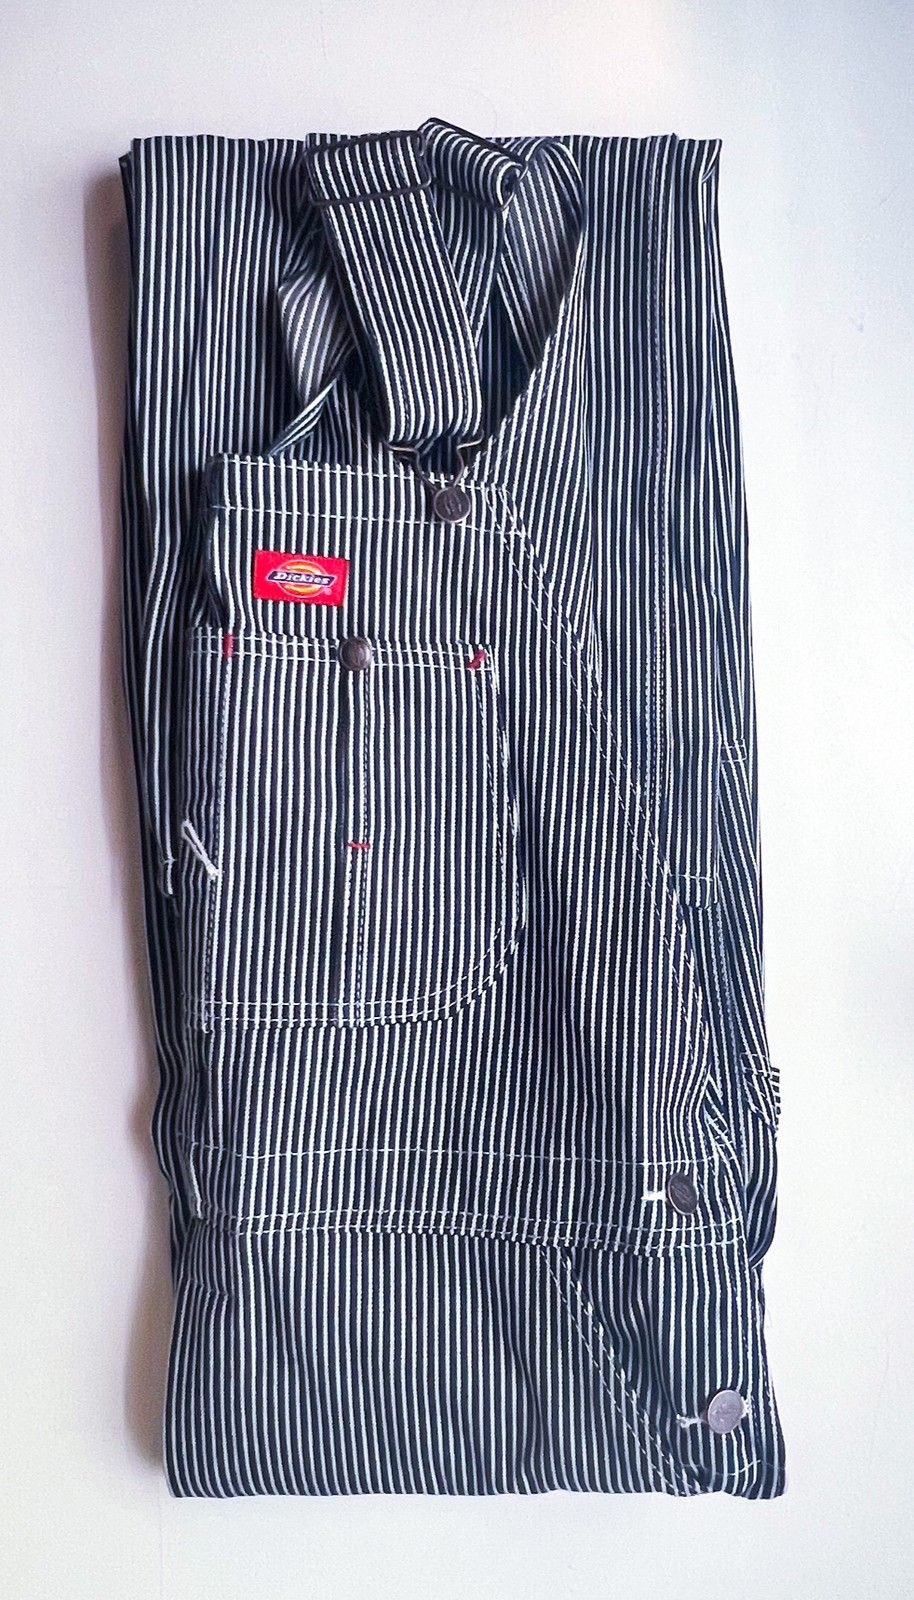 Dickies Stripe Bib Overalls Made In Mexico